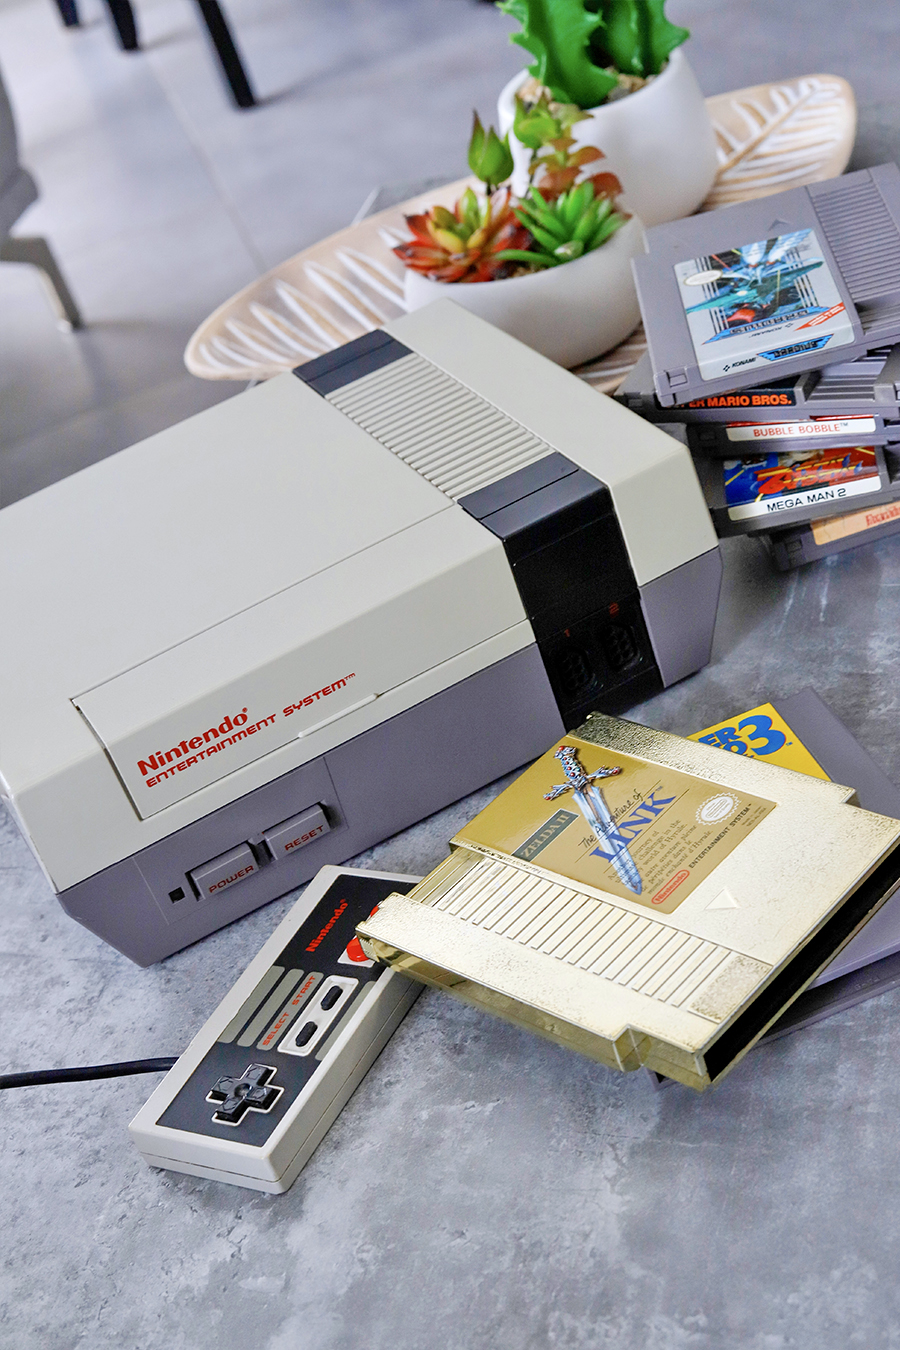 Nintendo NES console with a stack of games and a controller on a stone table. ©2021 Mathieu Improvisato